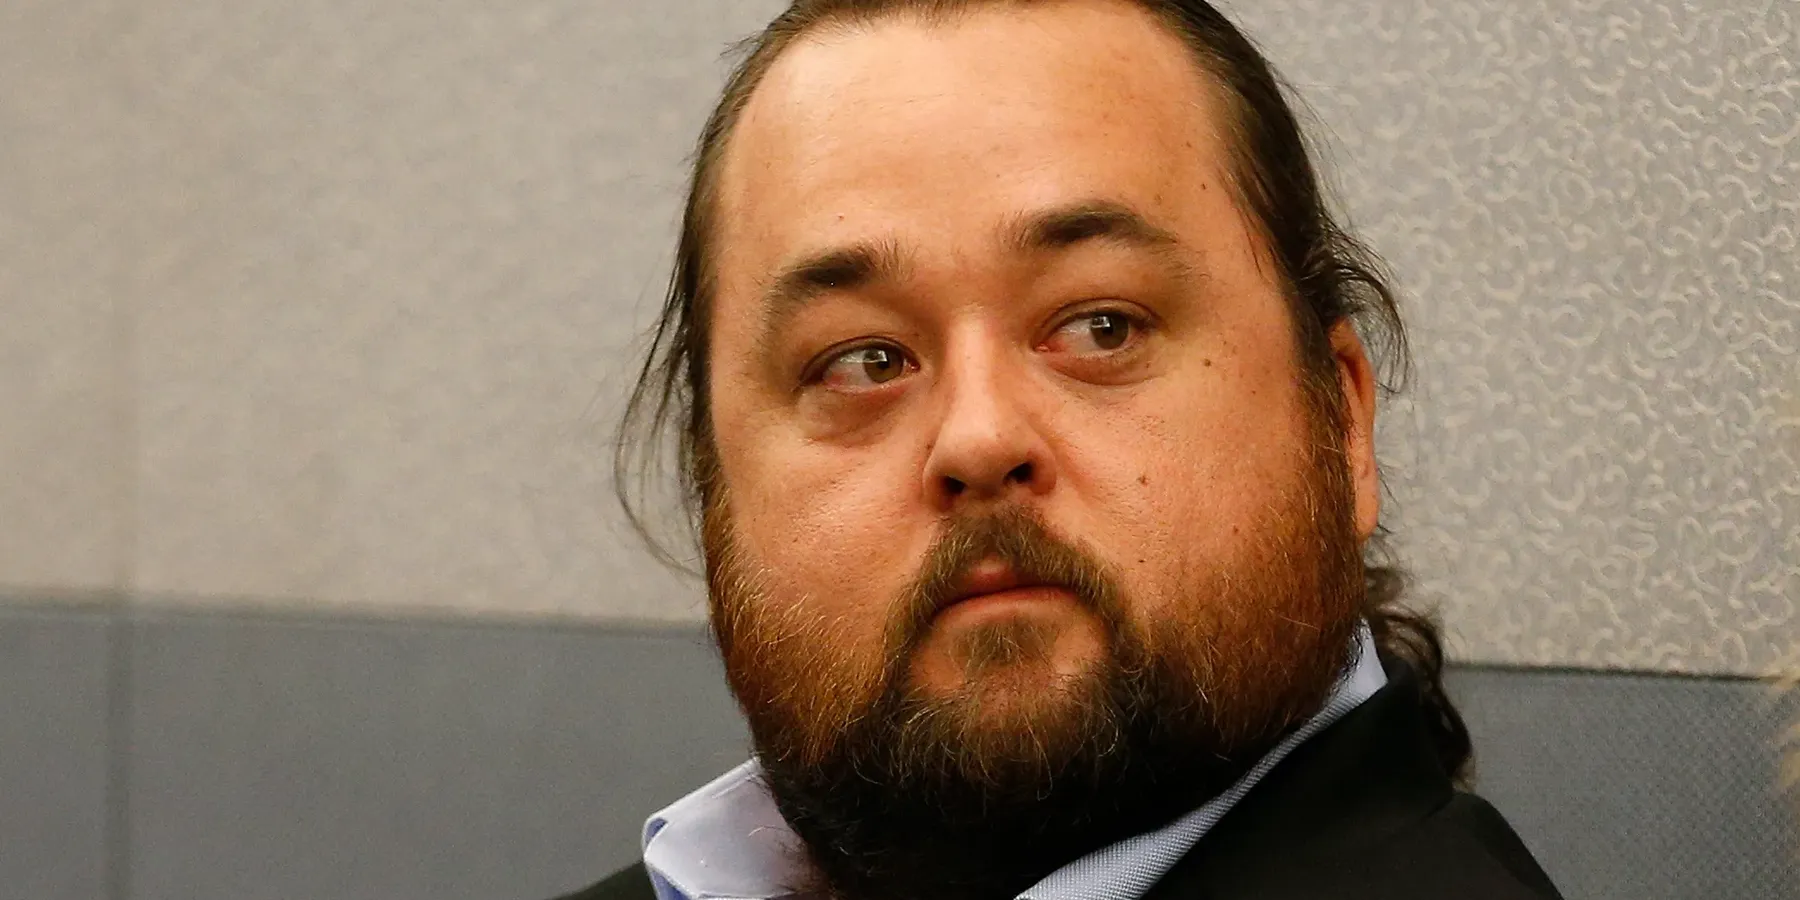 Austin Lee Russell Chumlee pawn stars wearing white shirt looking serious